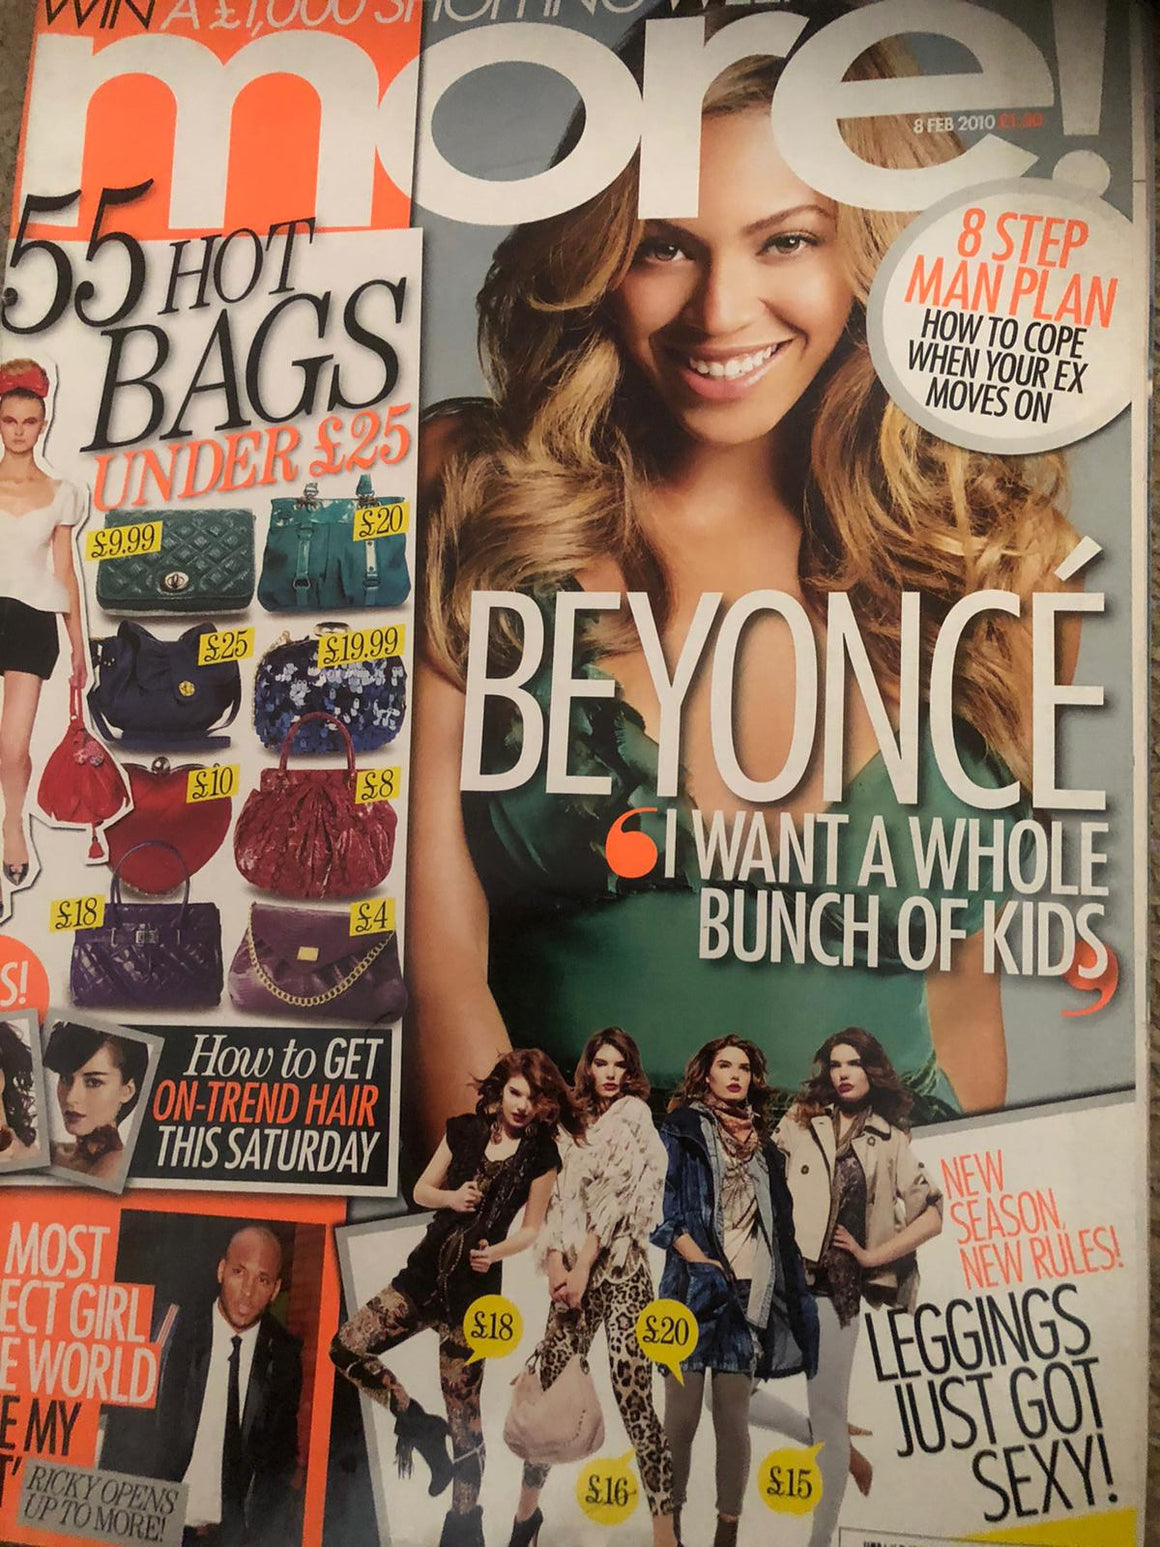 MORE MAGAZINE FEBRUARY 2010 BEYONCE COVER INTERVIEW